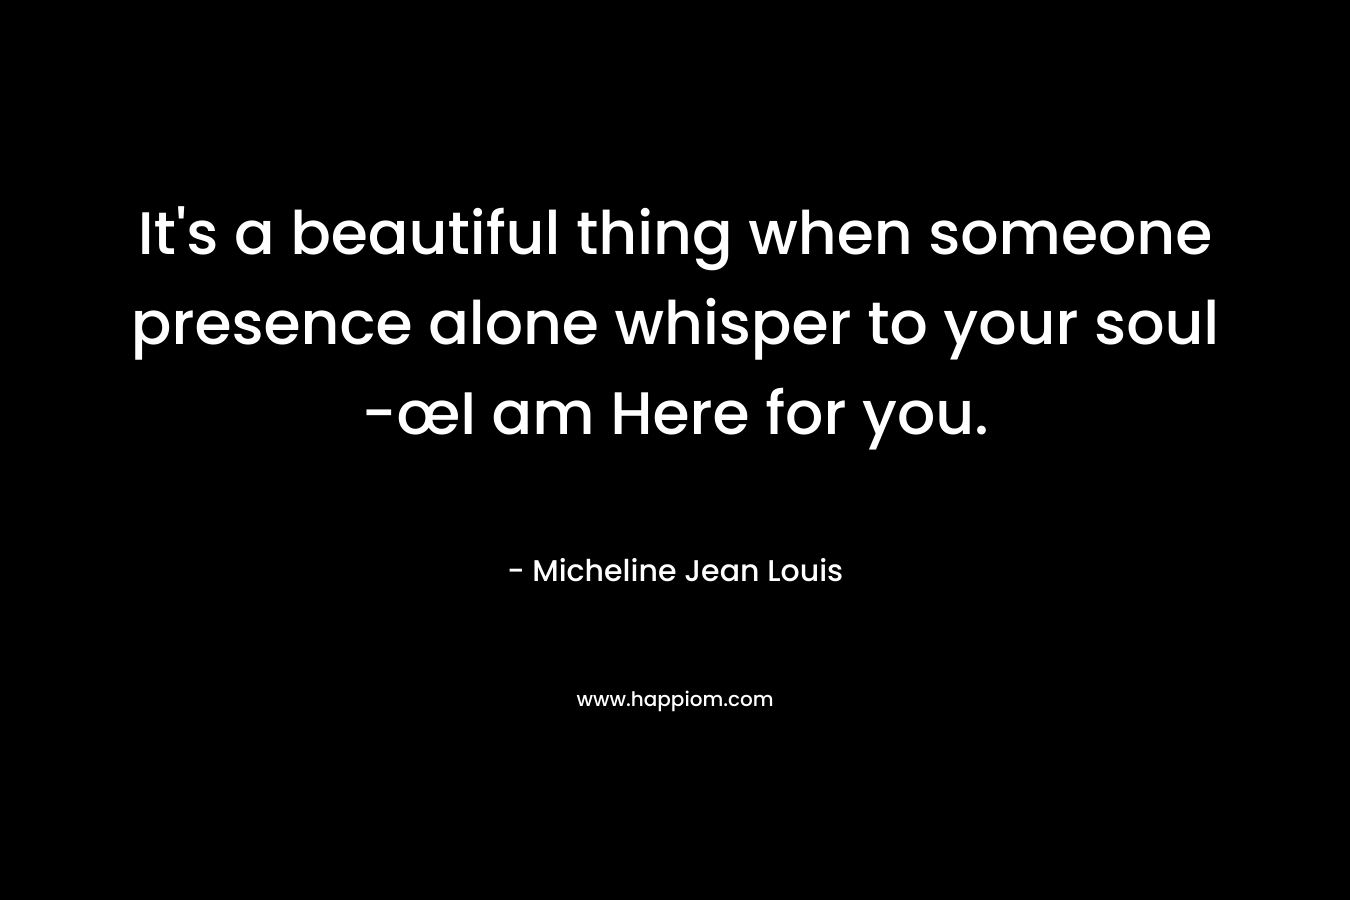 It's a beautiful thing when someone presence alone whisper to your soul -œI am Here for you.